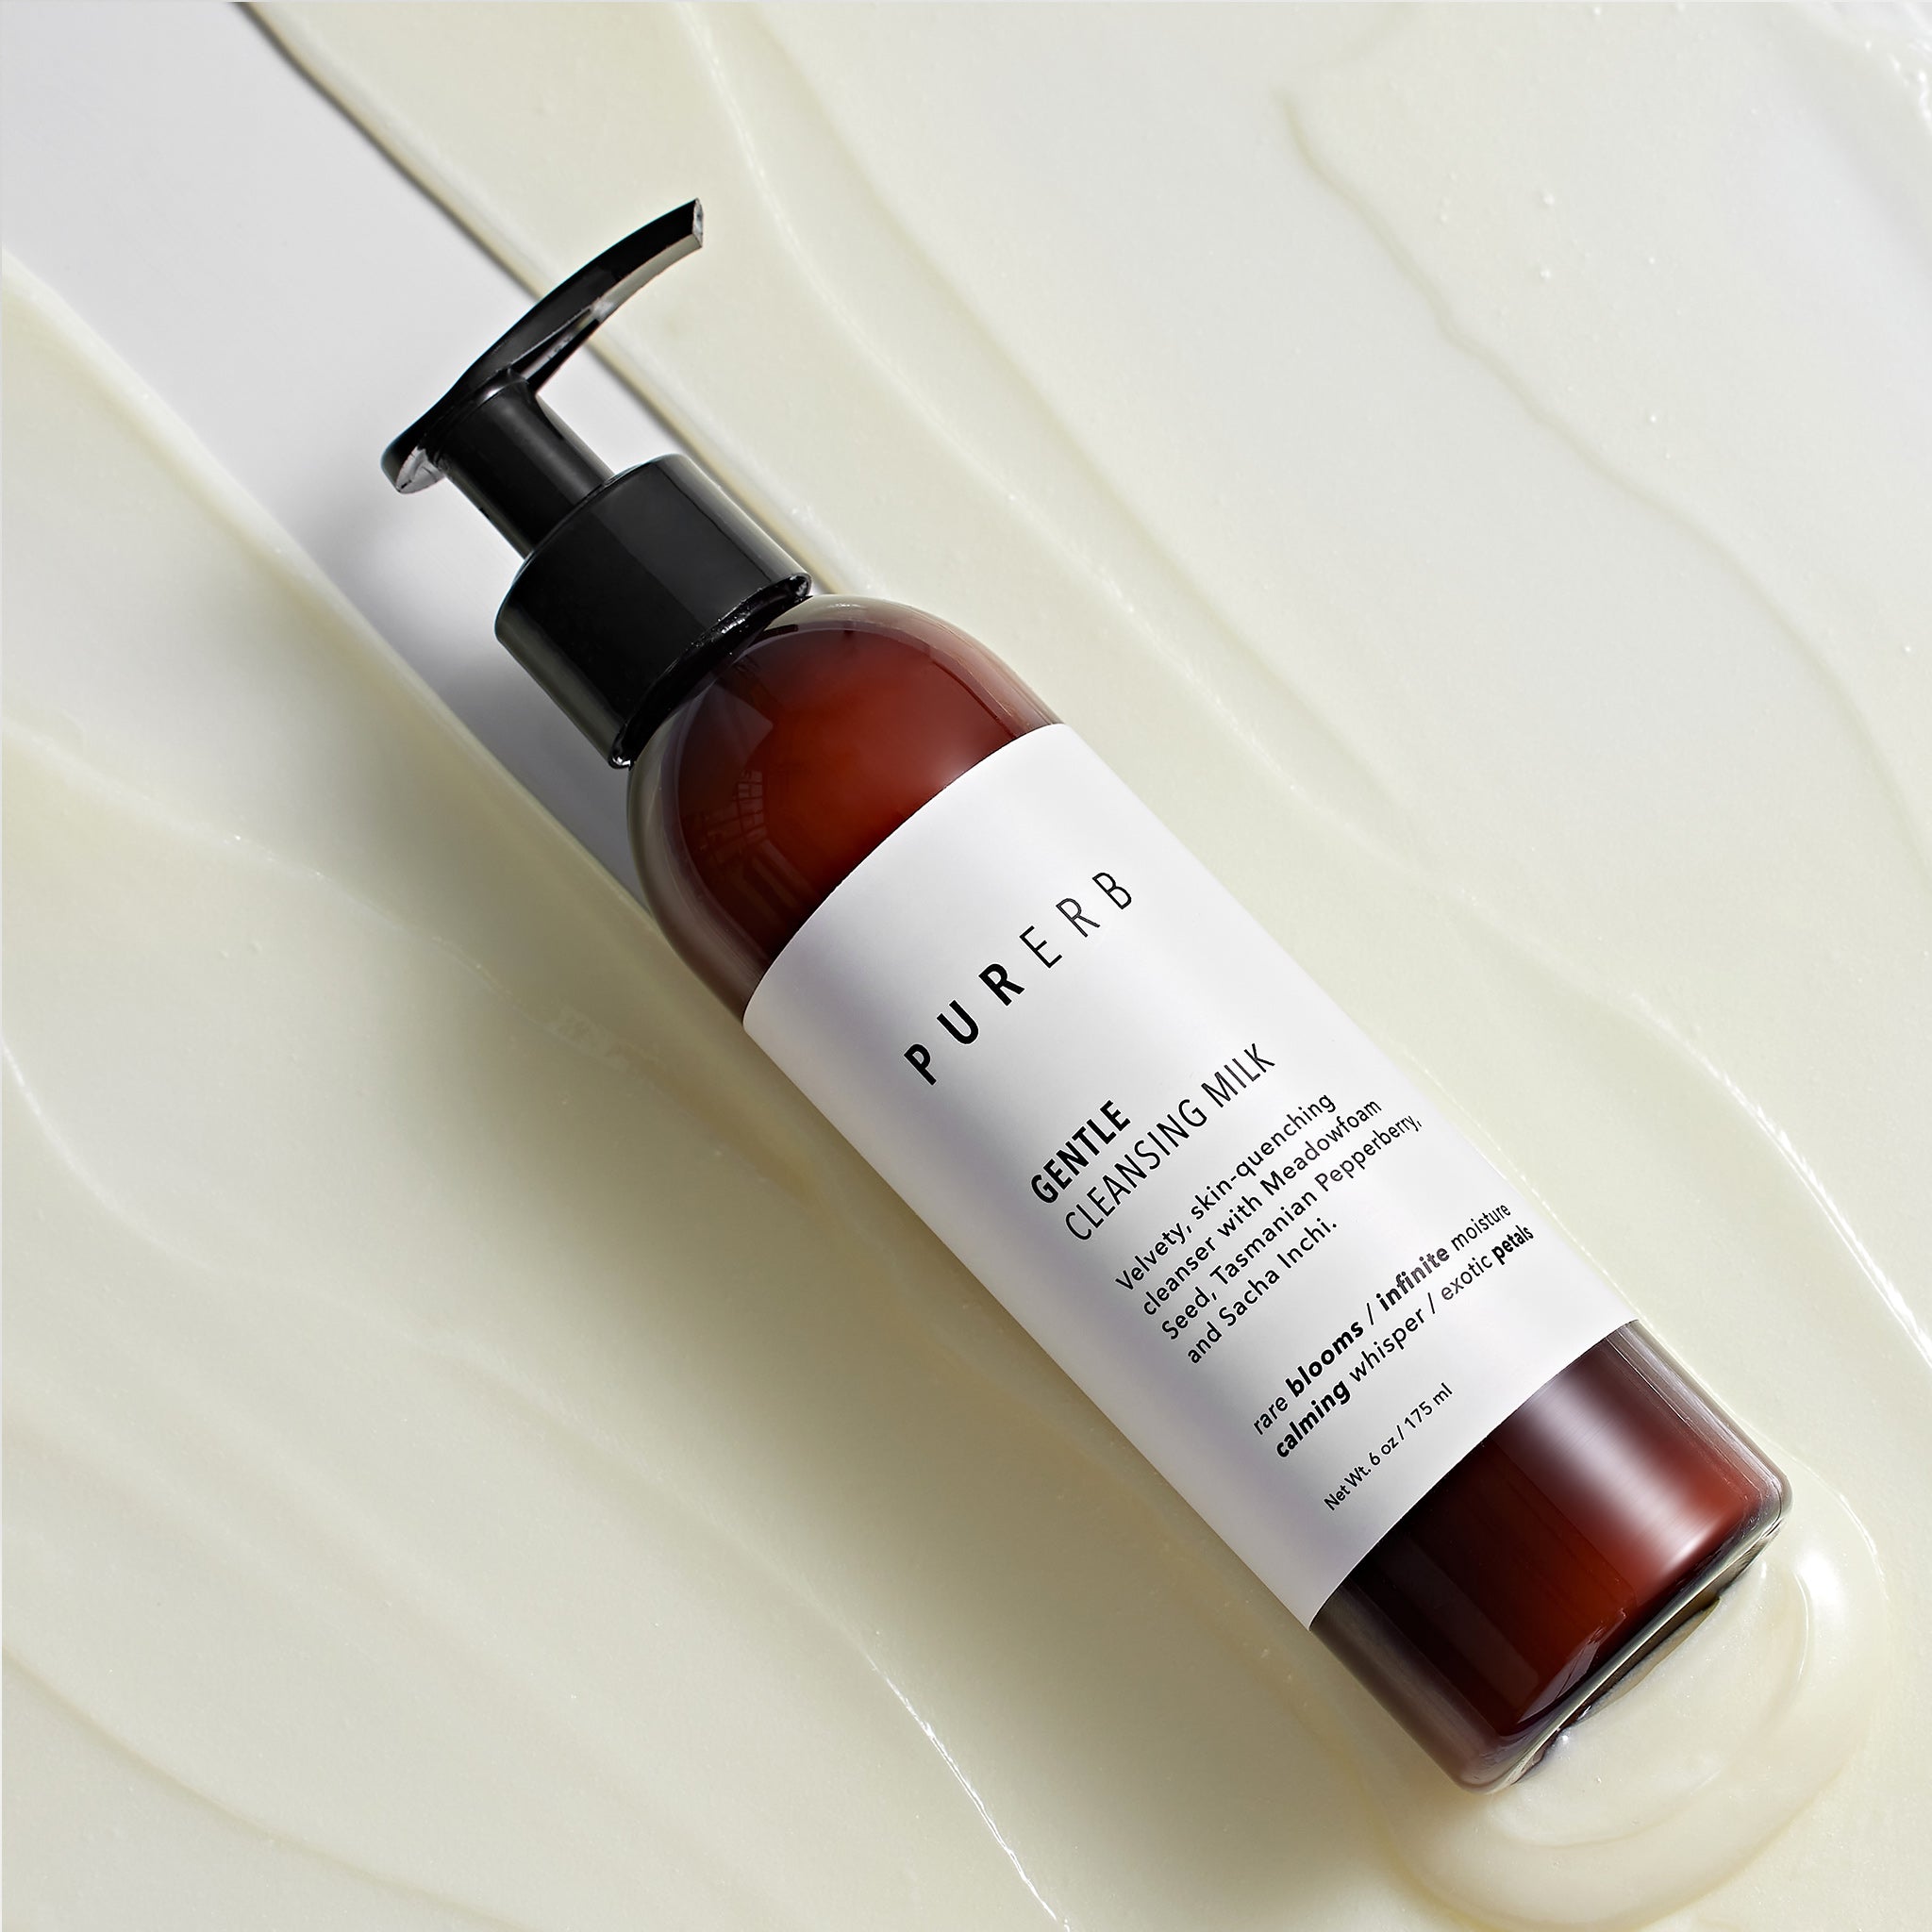 Tasmanian Pepperberry, and Sacha Inchi. Gently removes makeup and purifies pores while nourishing and hydrating. Ideal for normal, sensitive, and dry skin. Combat dullness, dryness, irritation, and wrinkles.